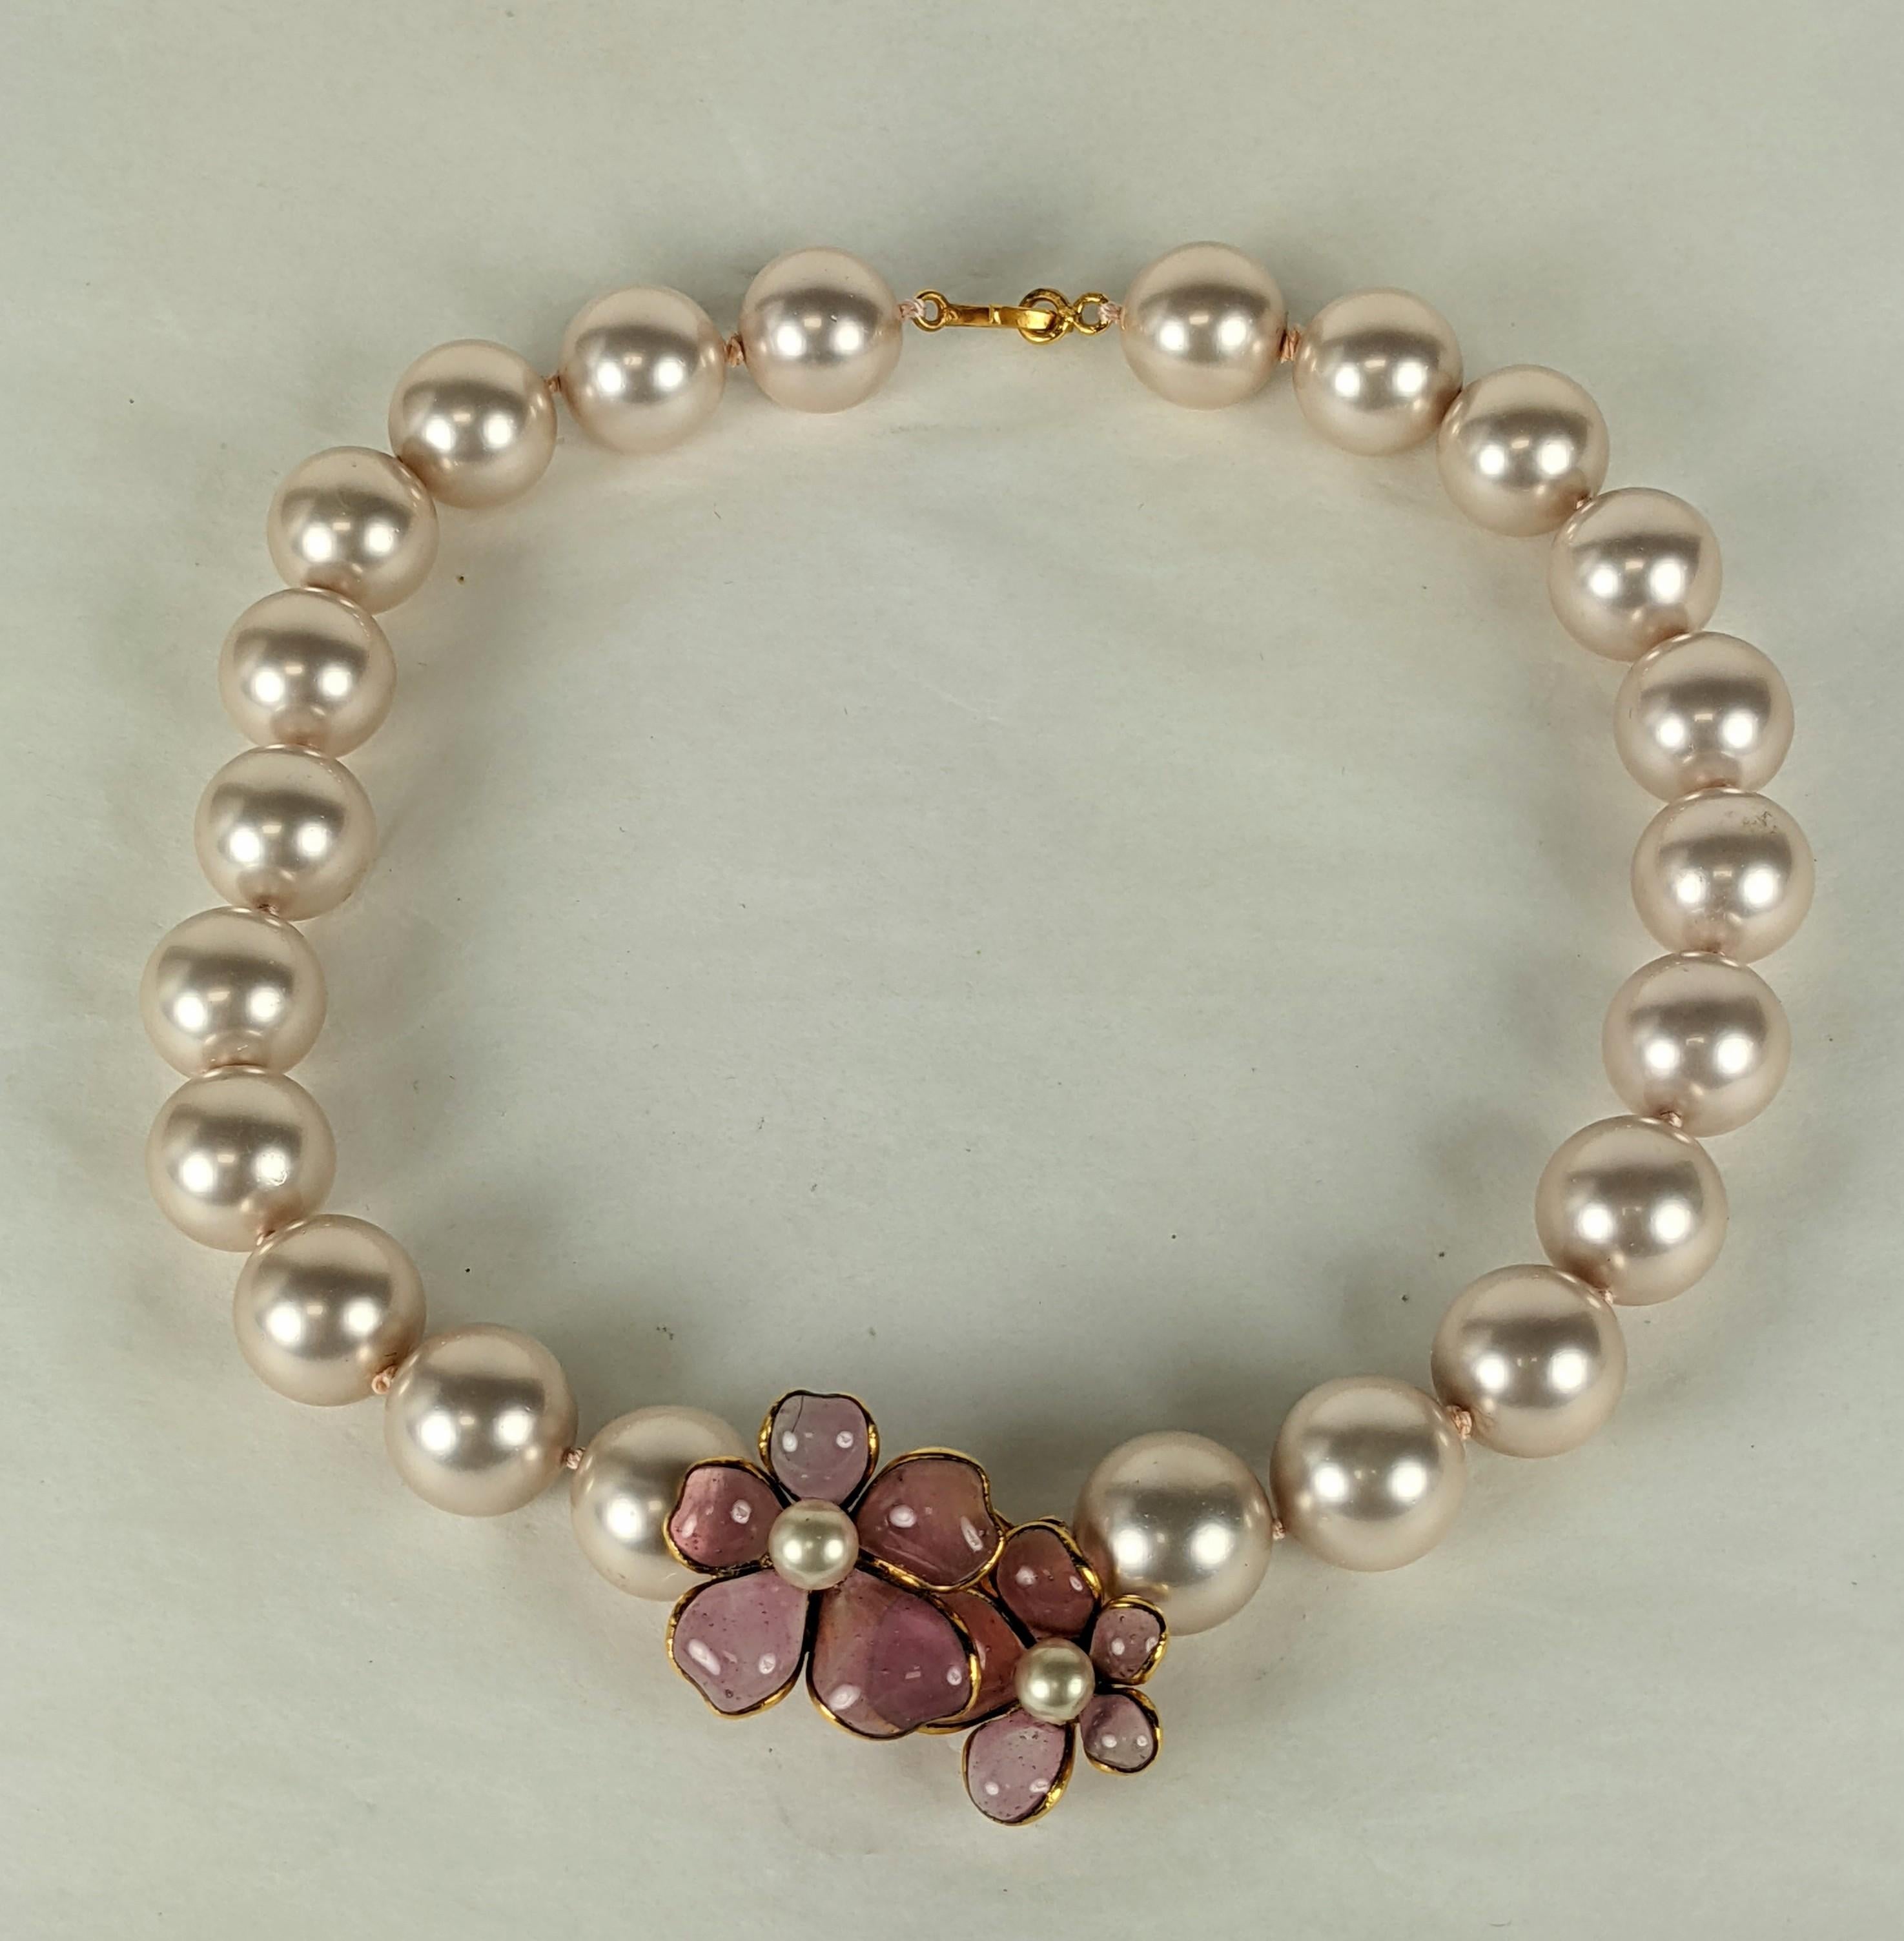 Chanel necklace with pale rose poured glass double flower motif on hand knotted 15 mm high quality Maison Gripoix handmade pinky beige toned faux pearls.
Length: 16.5